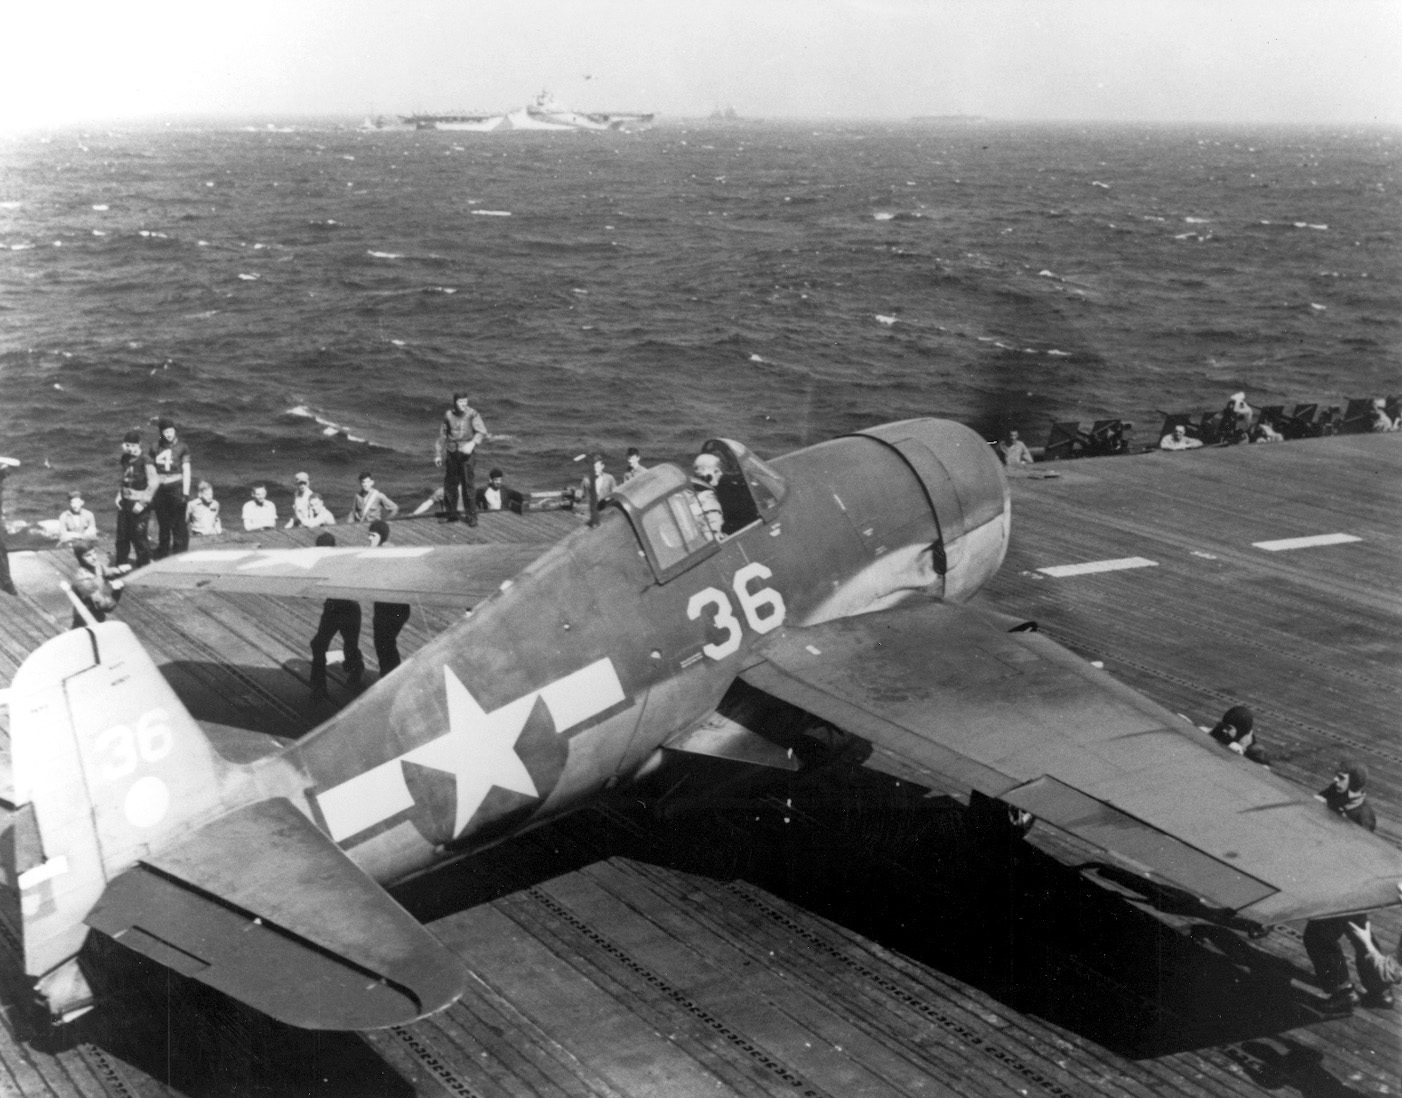 Following a successful raid against targets in the Marianas, a Grumman F6F Hellcat fighter sets down on the USS Hornet. A tough, powerful fighter, the Hellcat ultimately dominated the skies over the Pacific. 